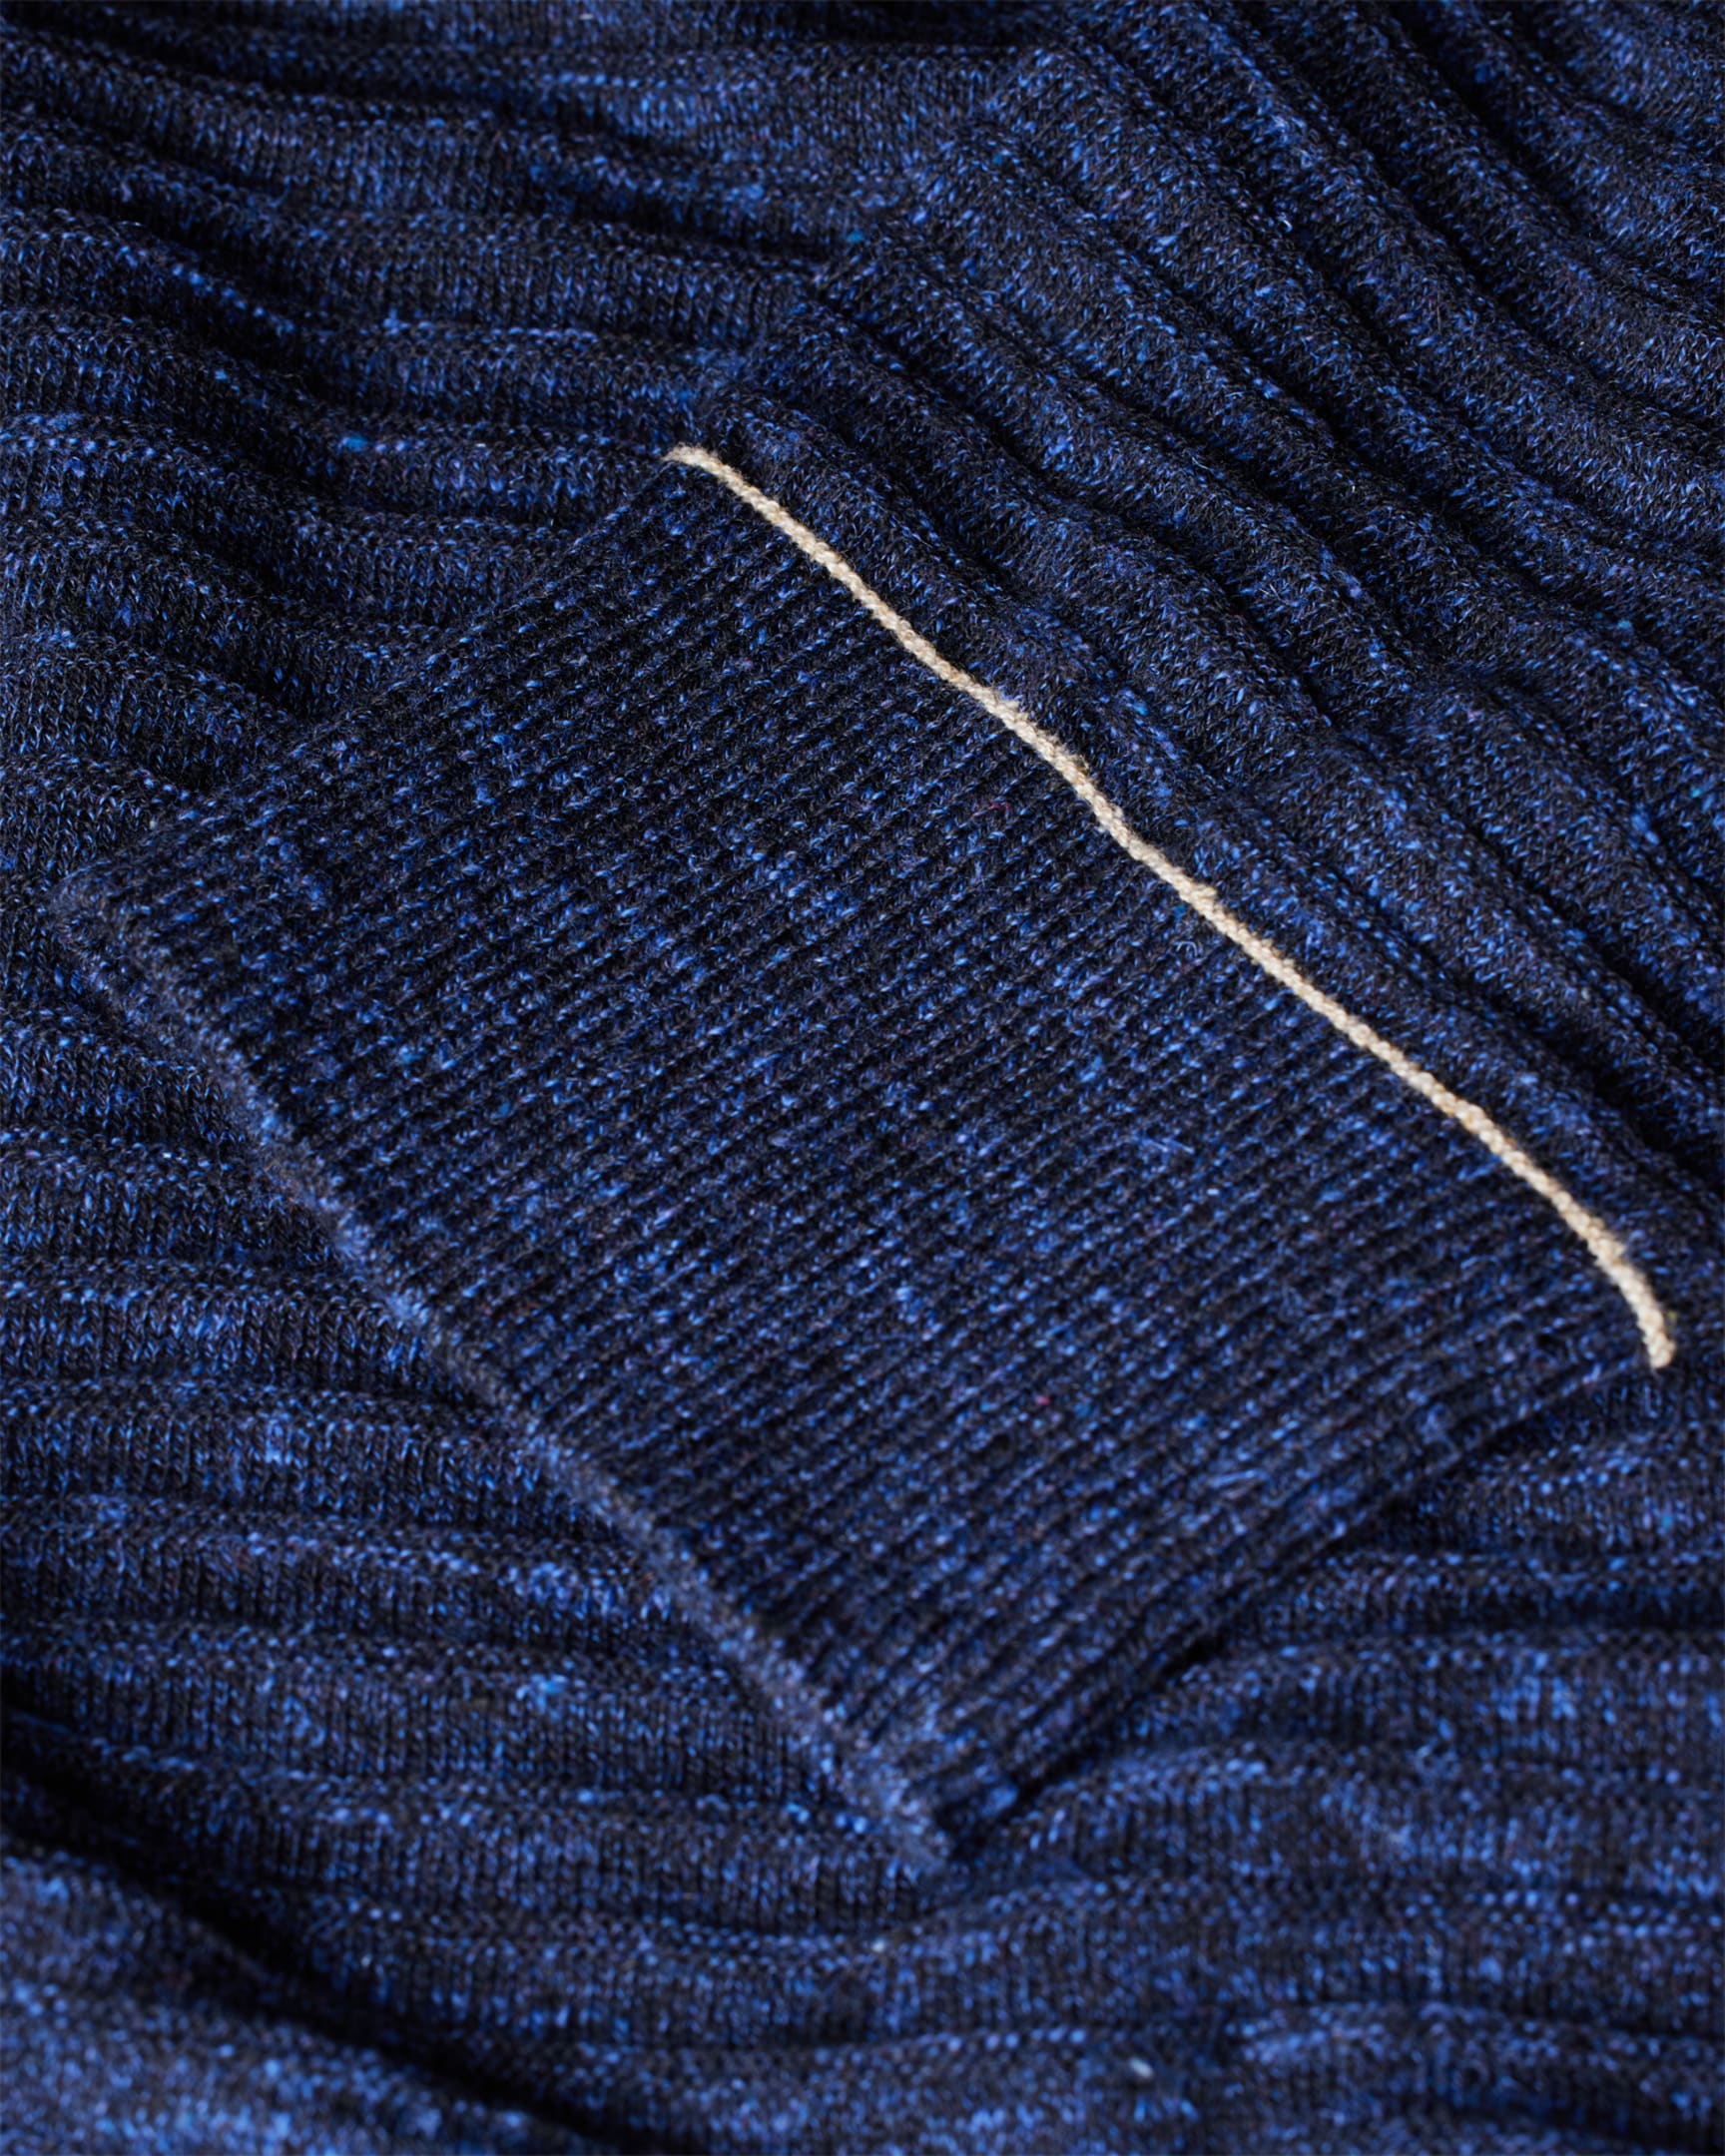 Detail View - Navy Cotton-Linen Textured Sweater Paul Smith